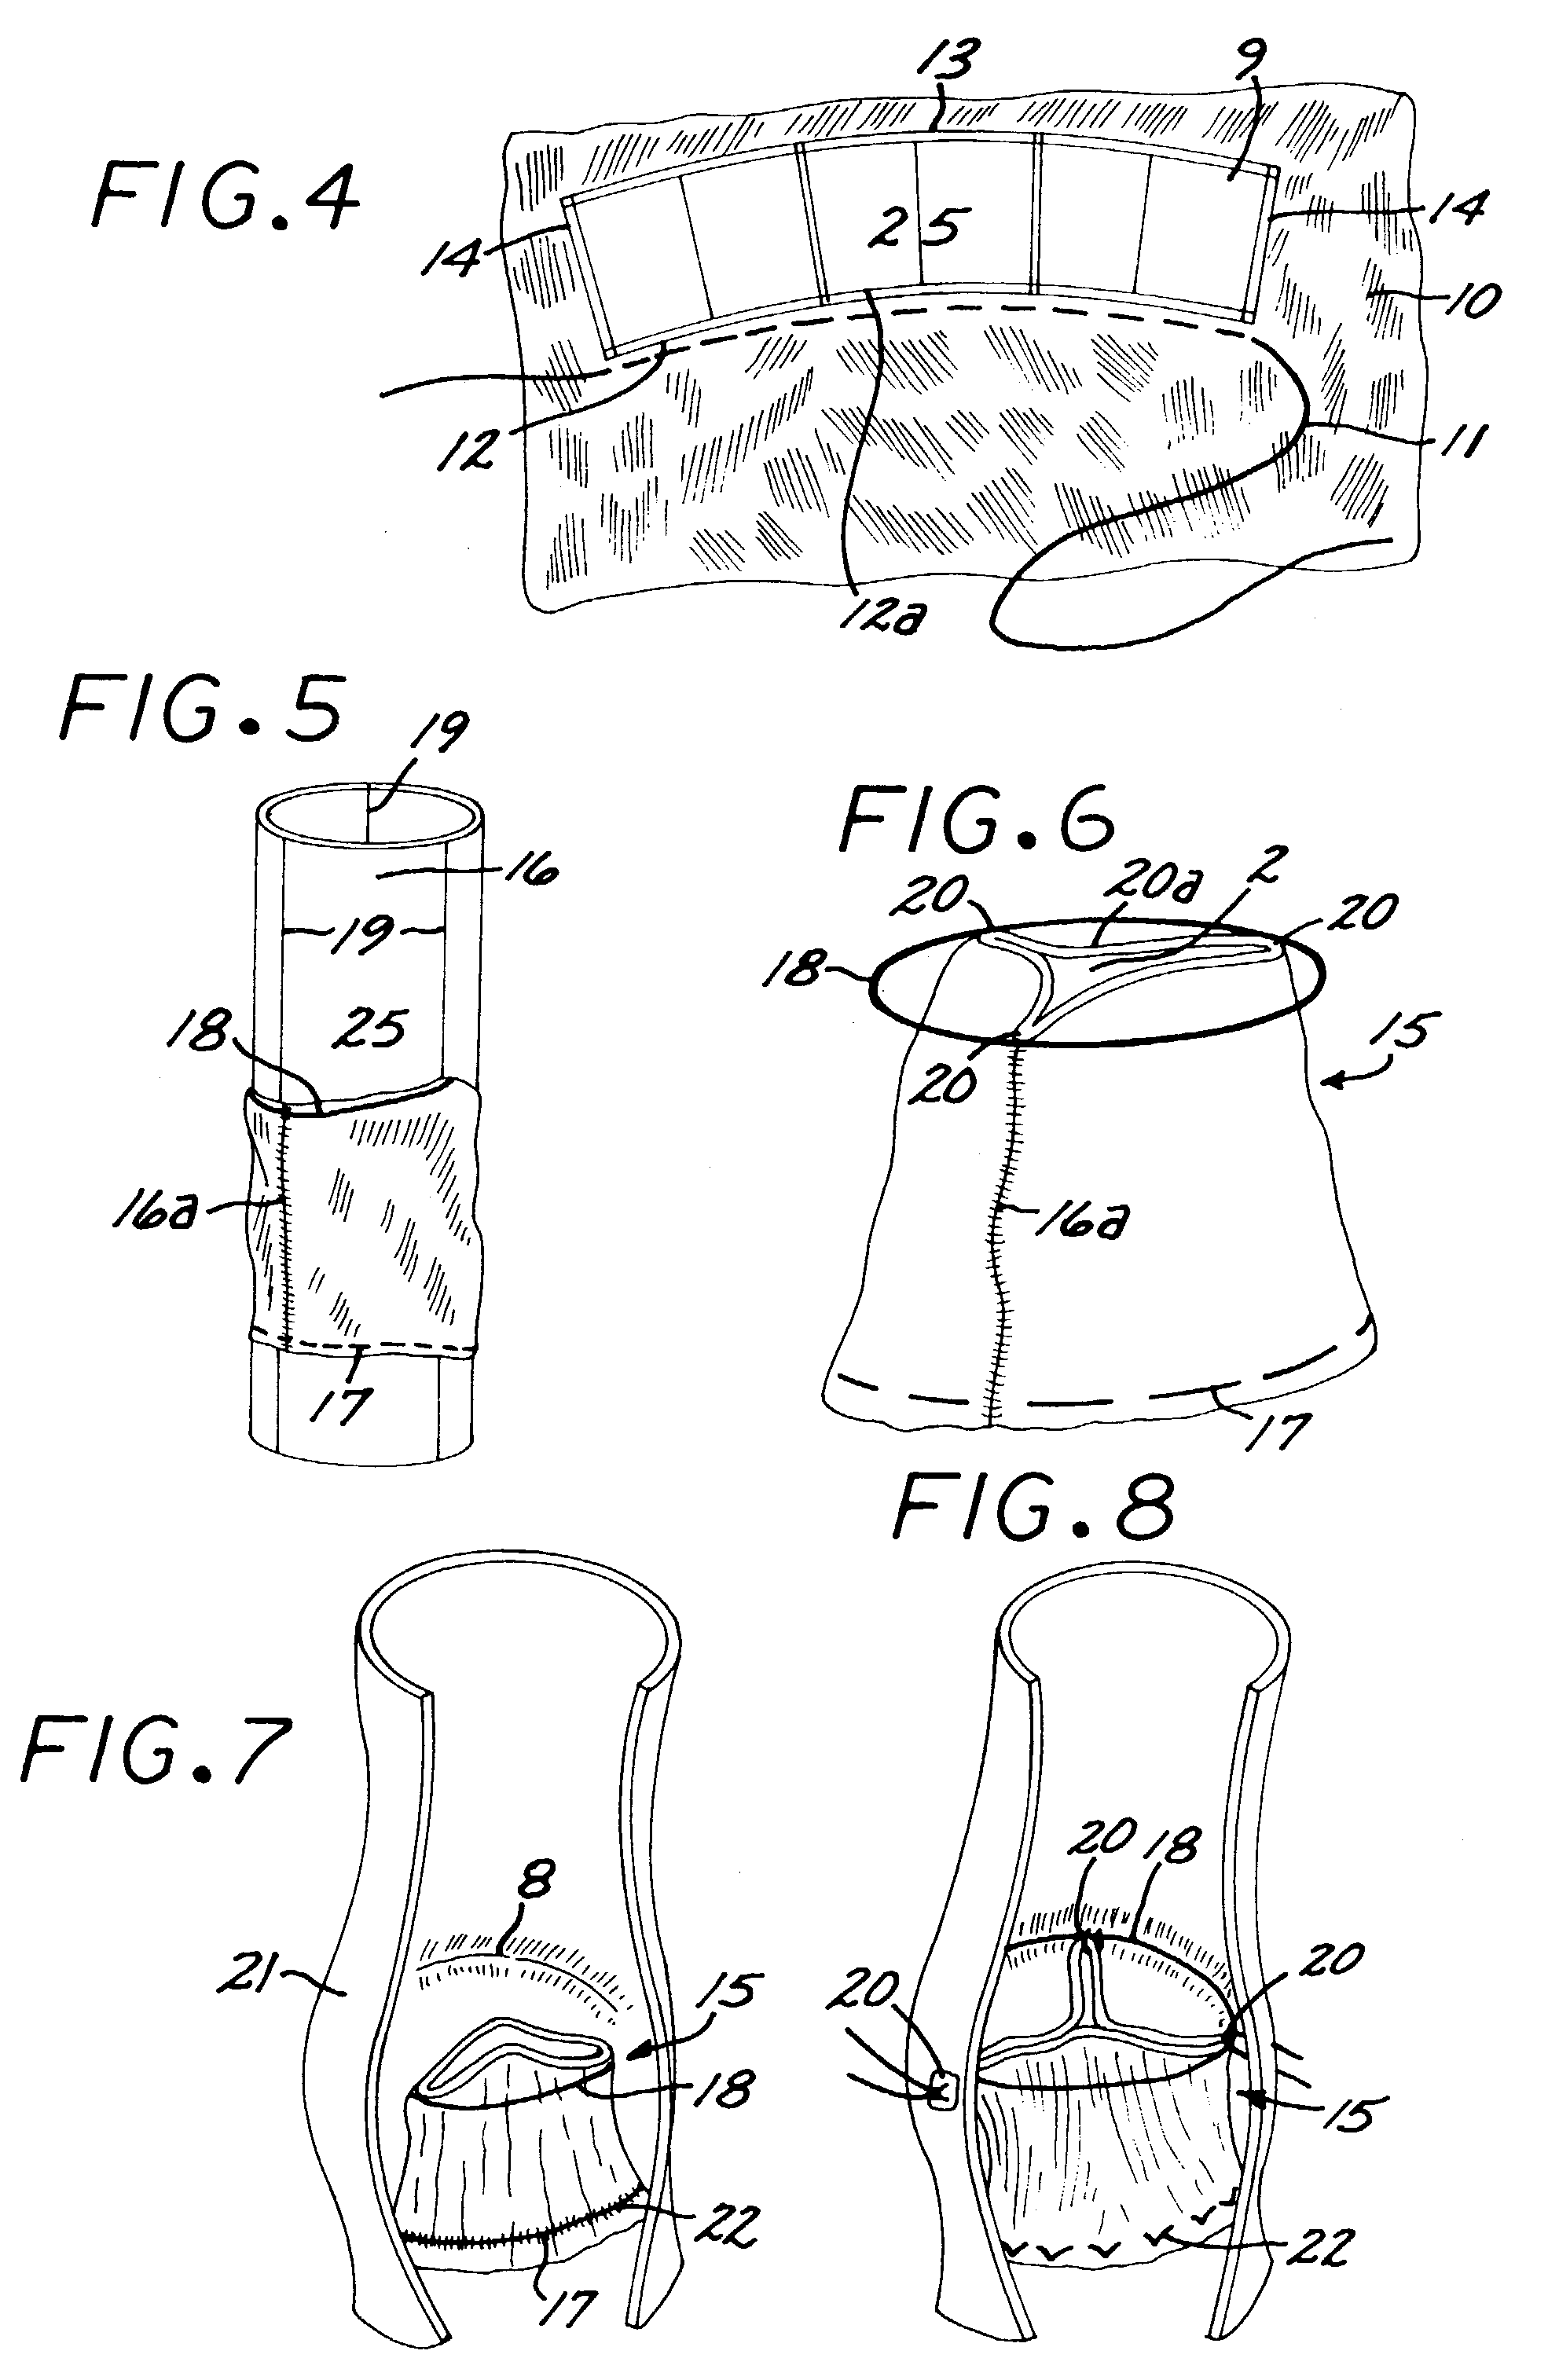 Reed valve for implantation into mammalian blood vessels and heart with optional temporary or permanent support